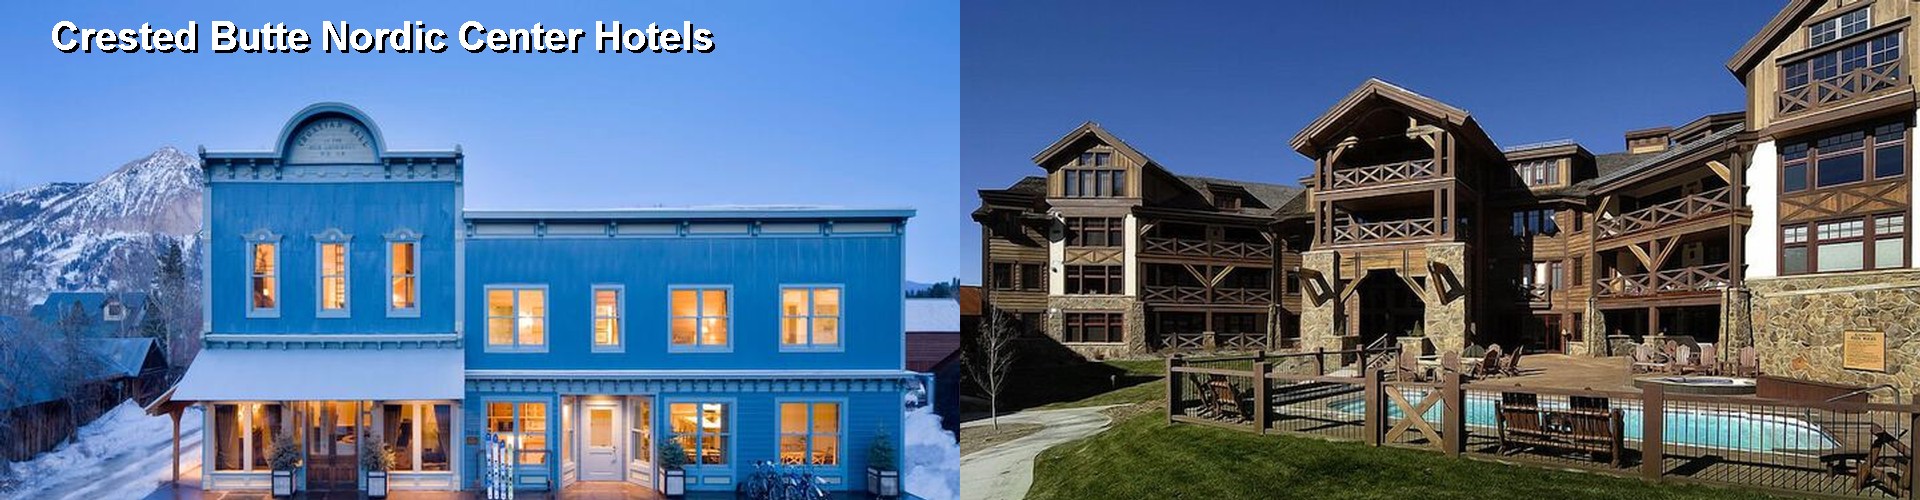 5 Best Hotels near Crested Butte Nordic Center